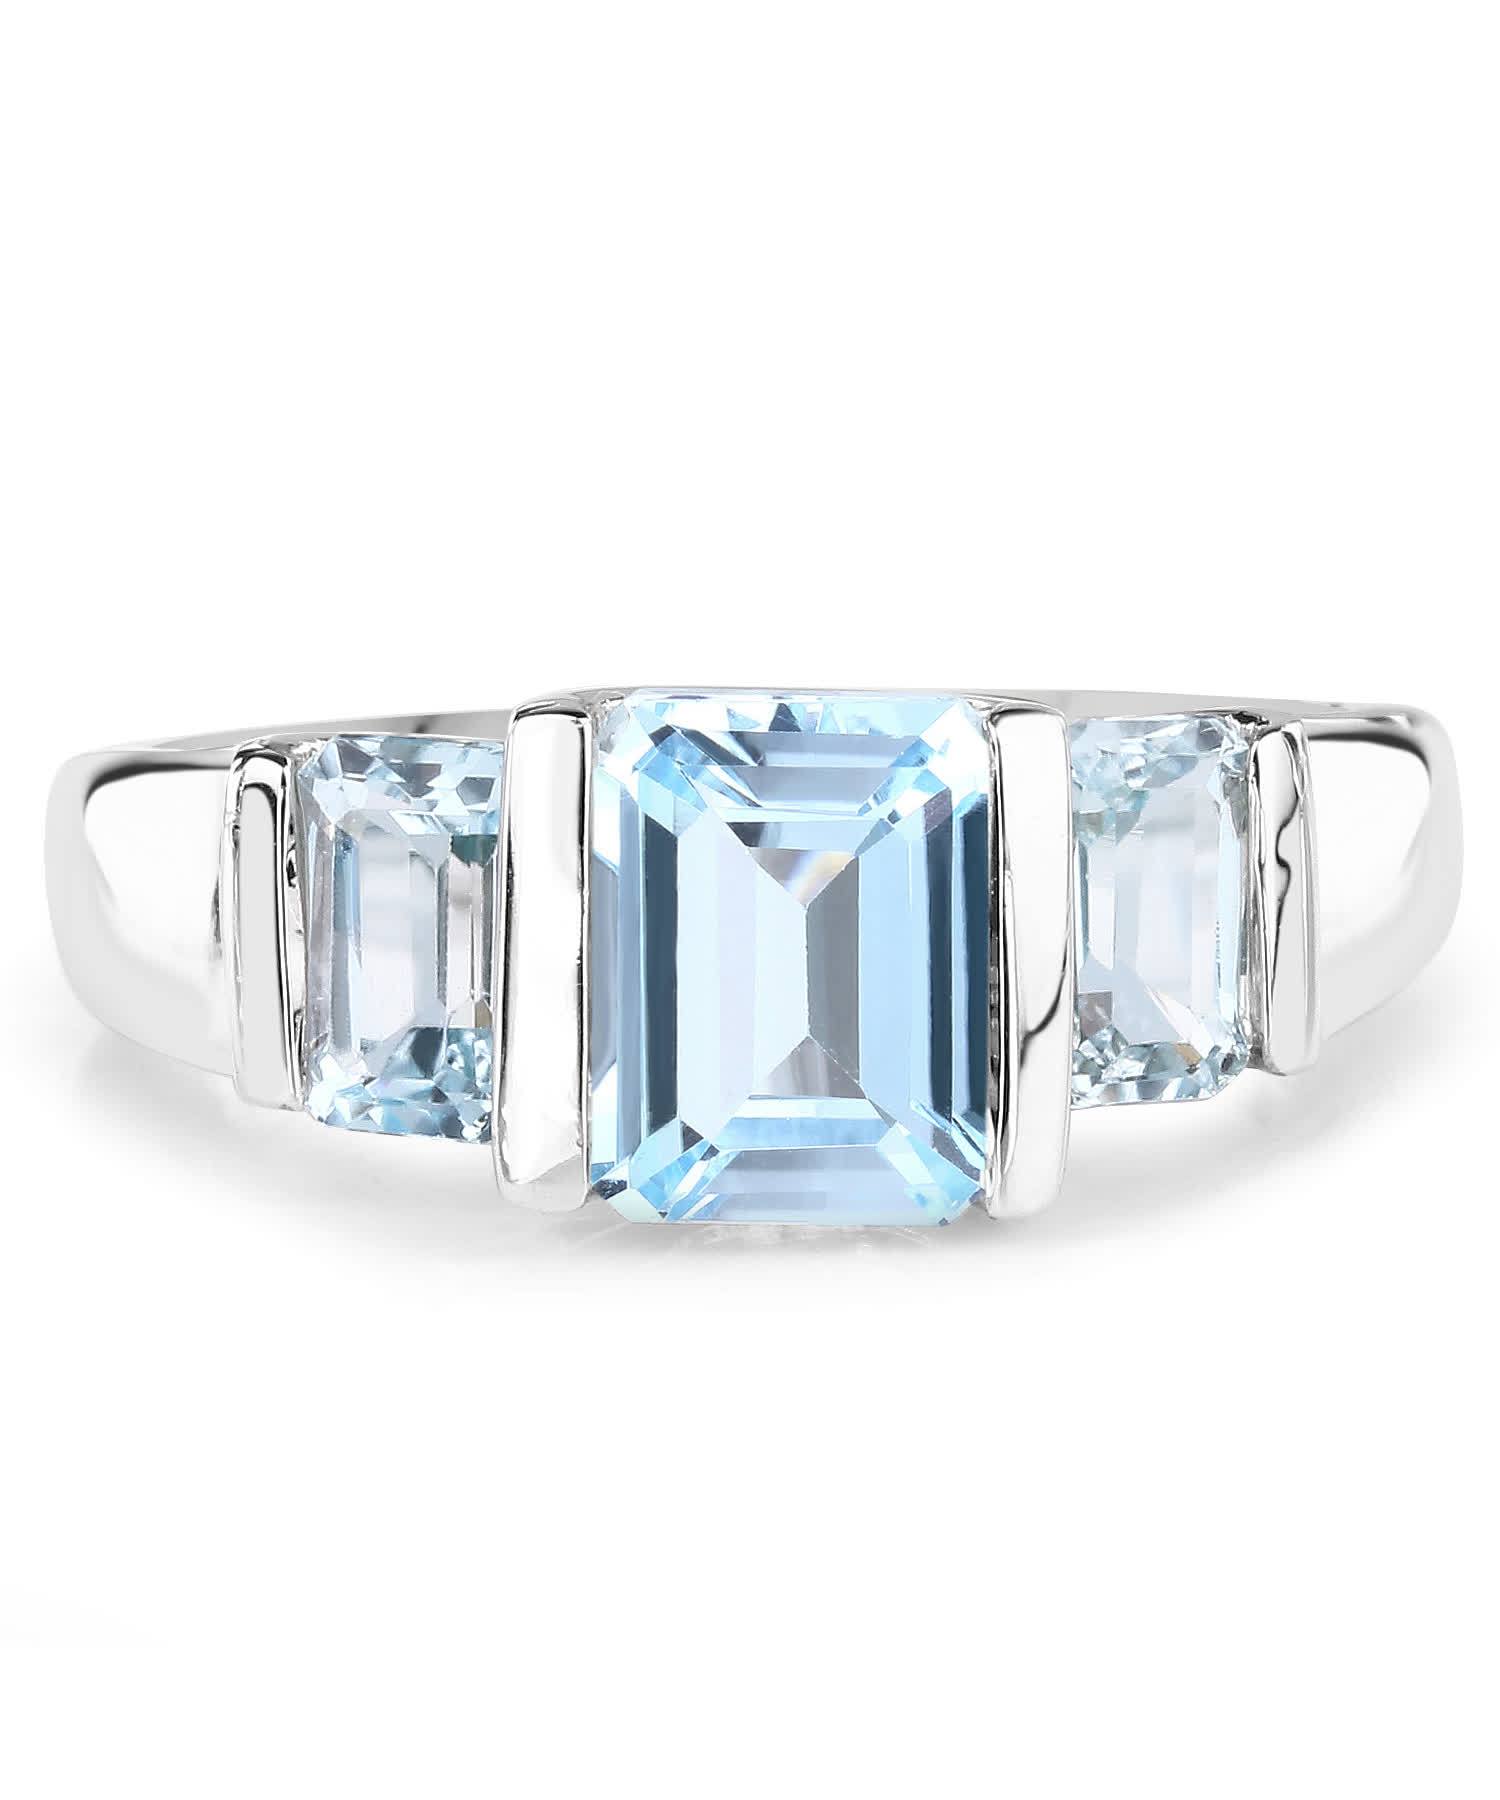 3.21ctw Natural Sky Blue Topaz Rhodium Plated 925 Sterling Silver Three-Stone Right Hand Ring View 3